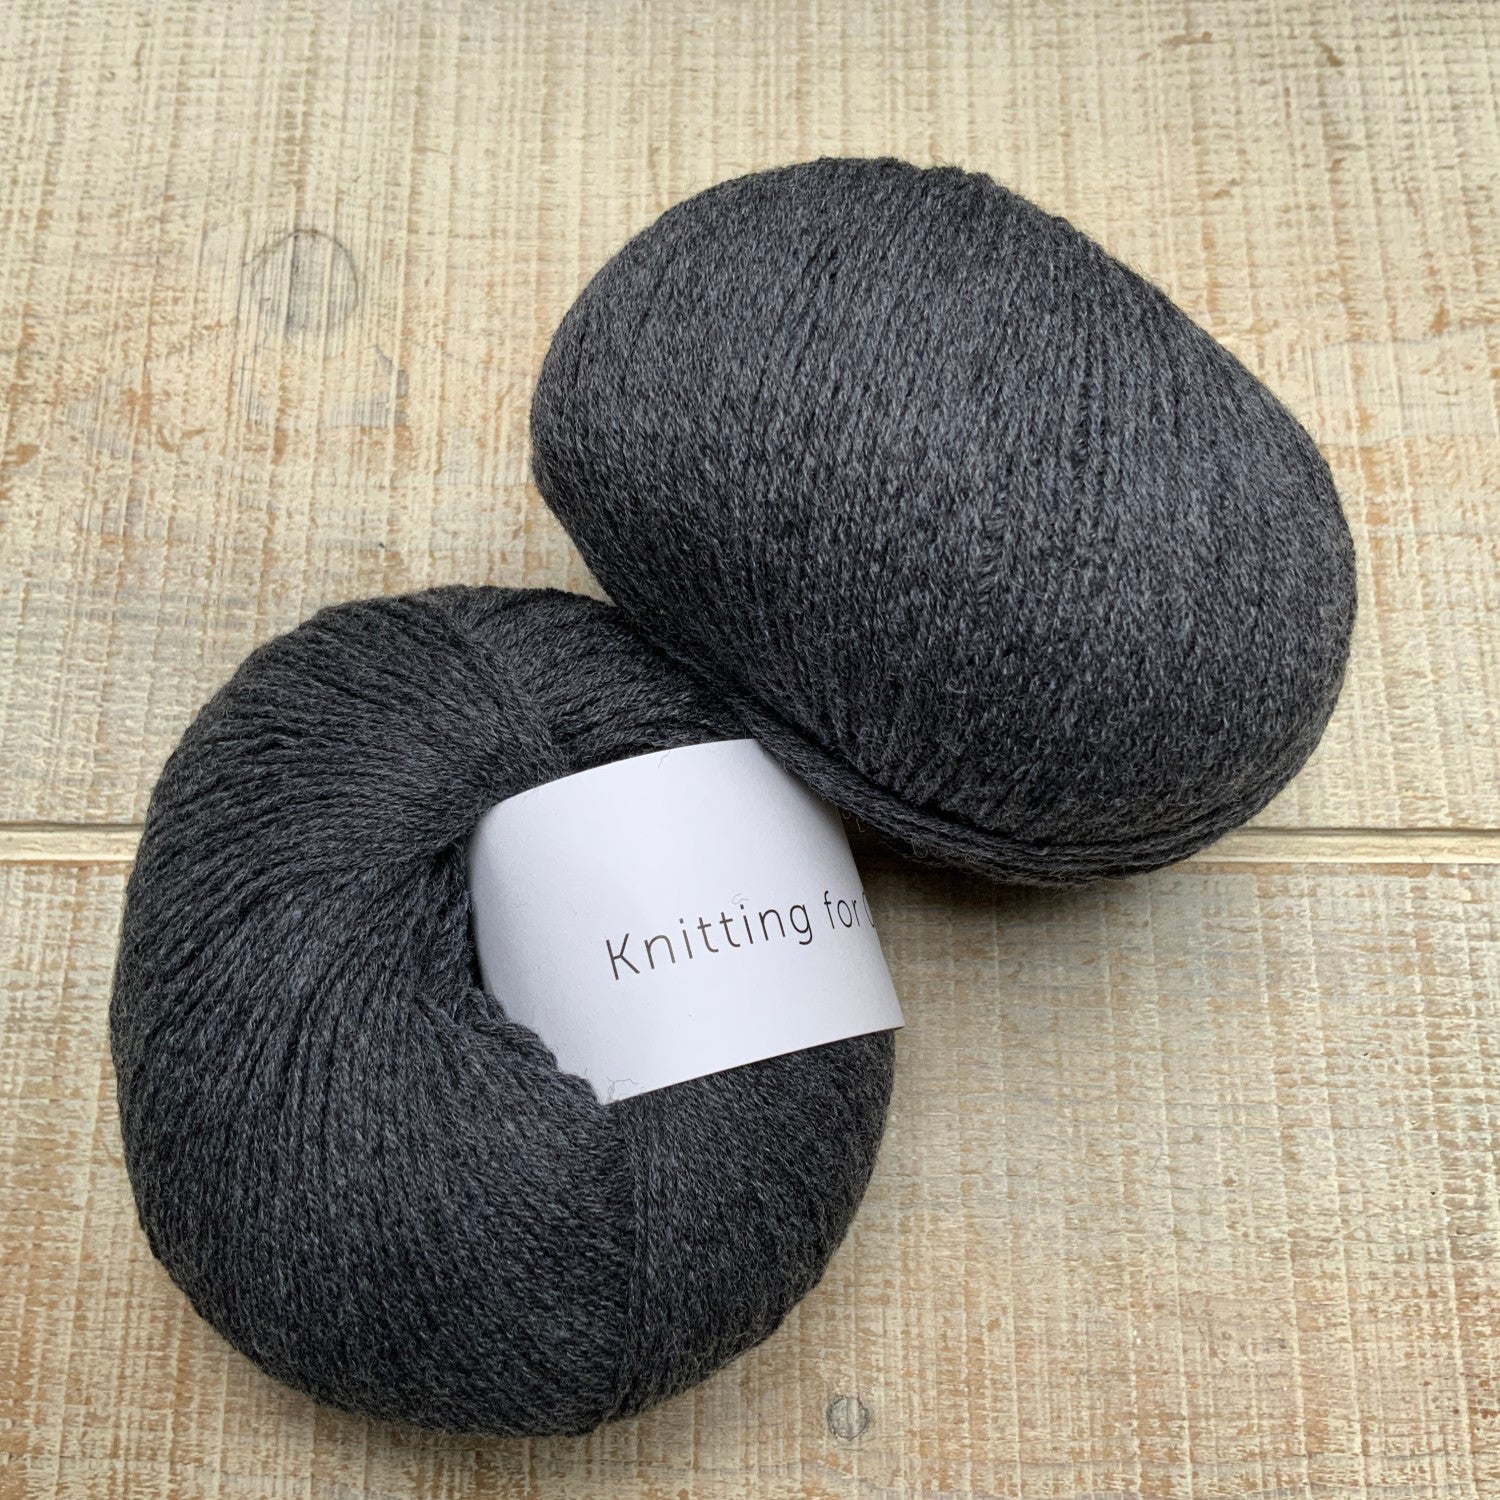 Knitting For Olive Double Soft Merino Lead | Unraveled Portland